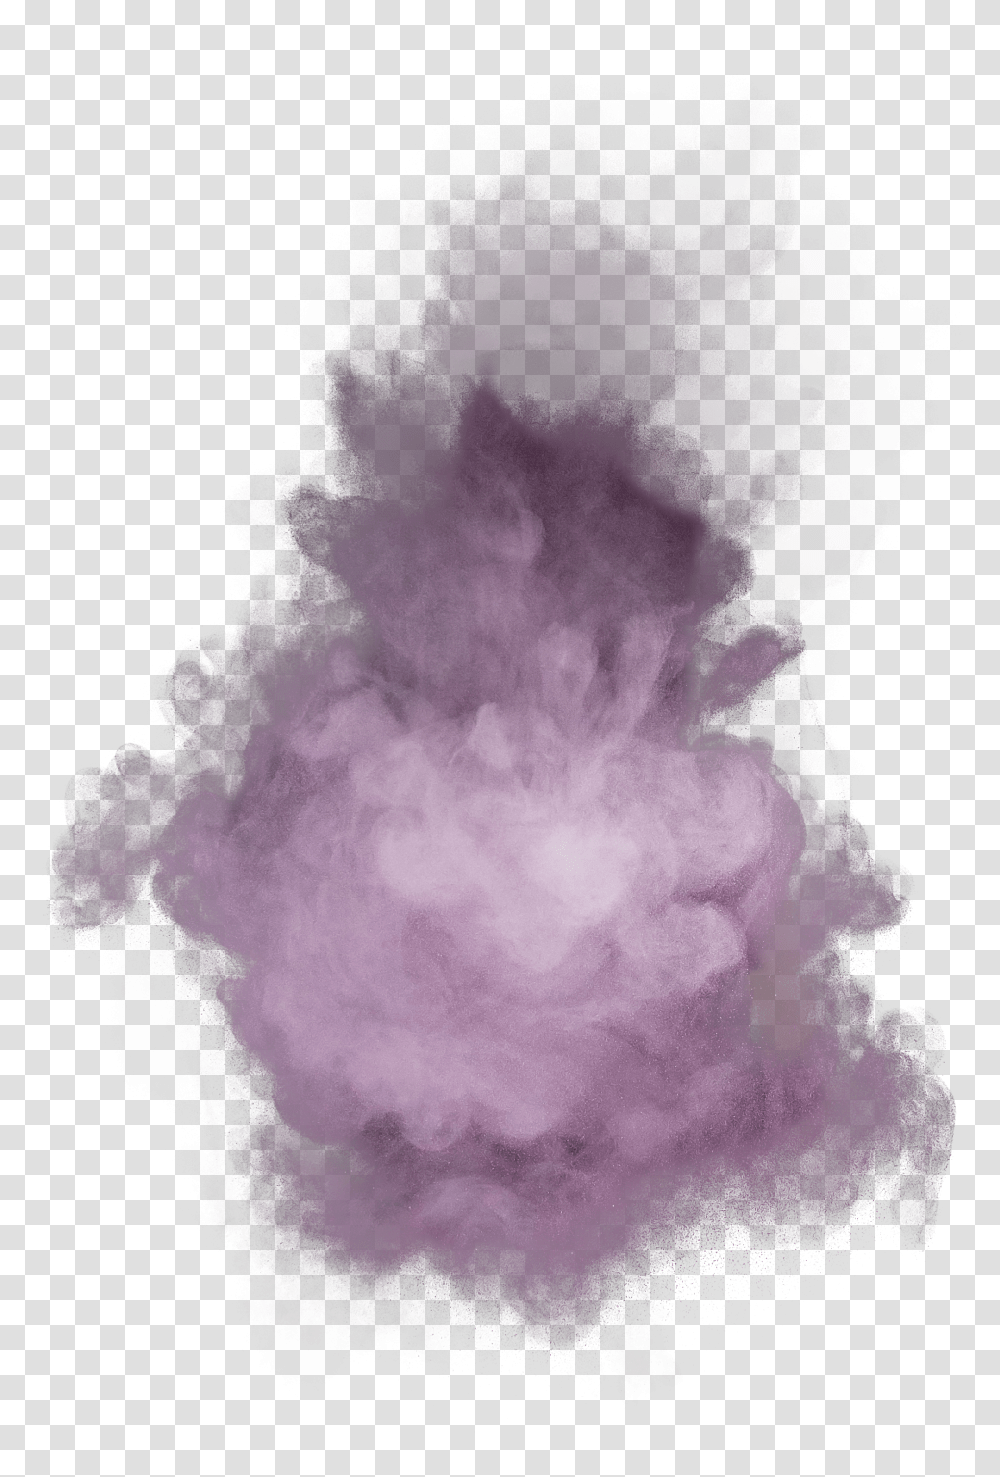 Drawn Explosions Colored Smoke Purple Powder Explosion Background Transparent Png